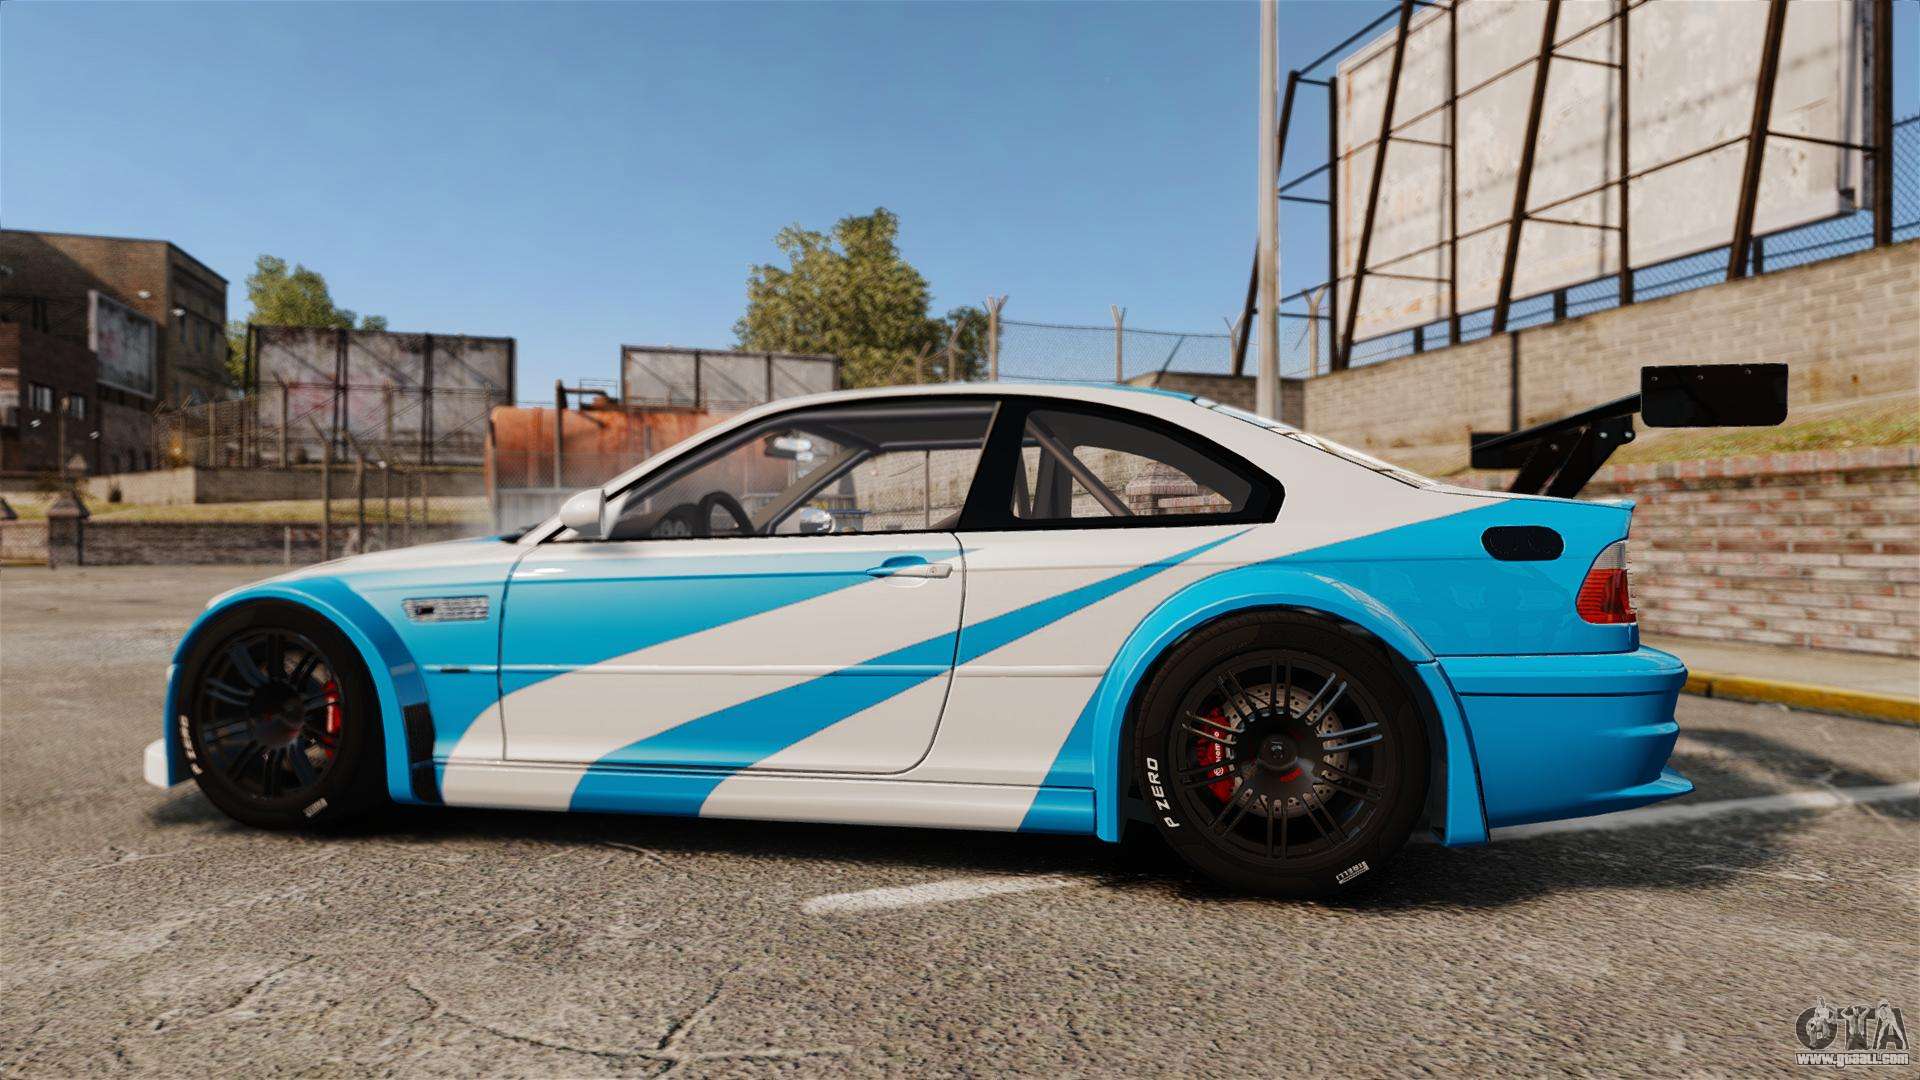 Nfs Most Wanted 2012 Bmw M3 Gtr Save Game Download